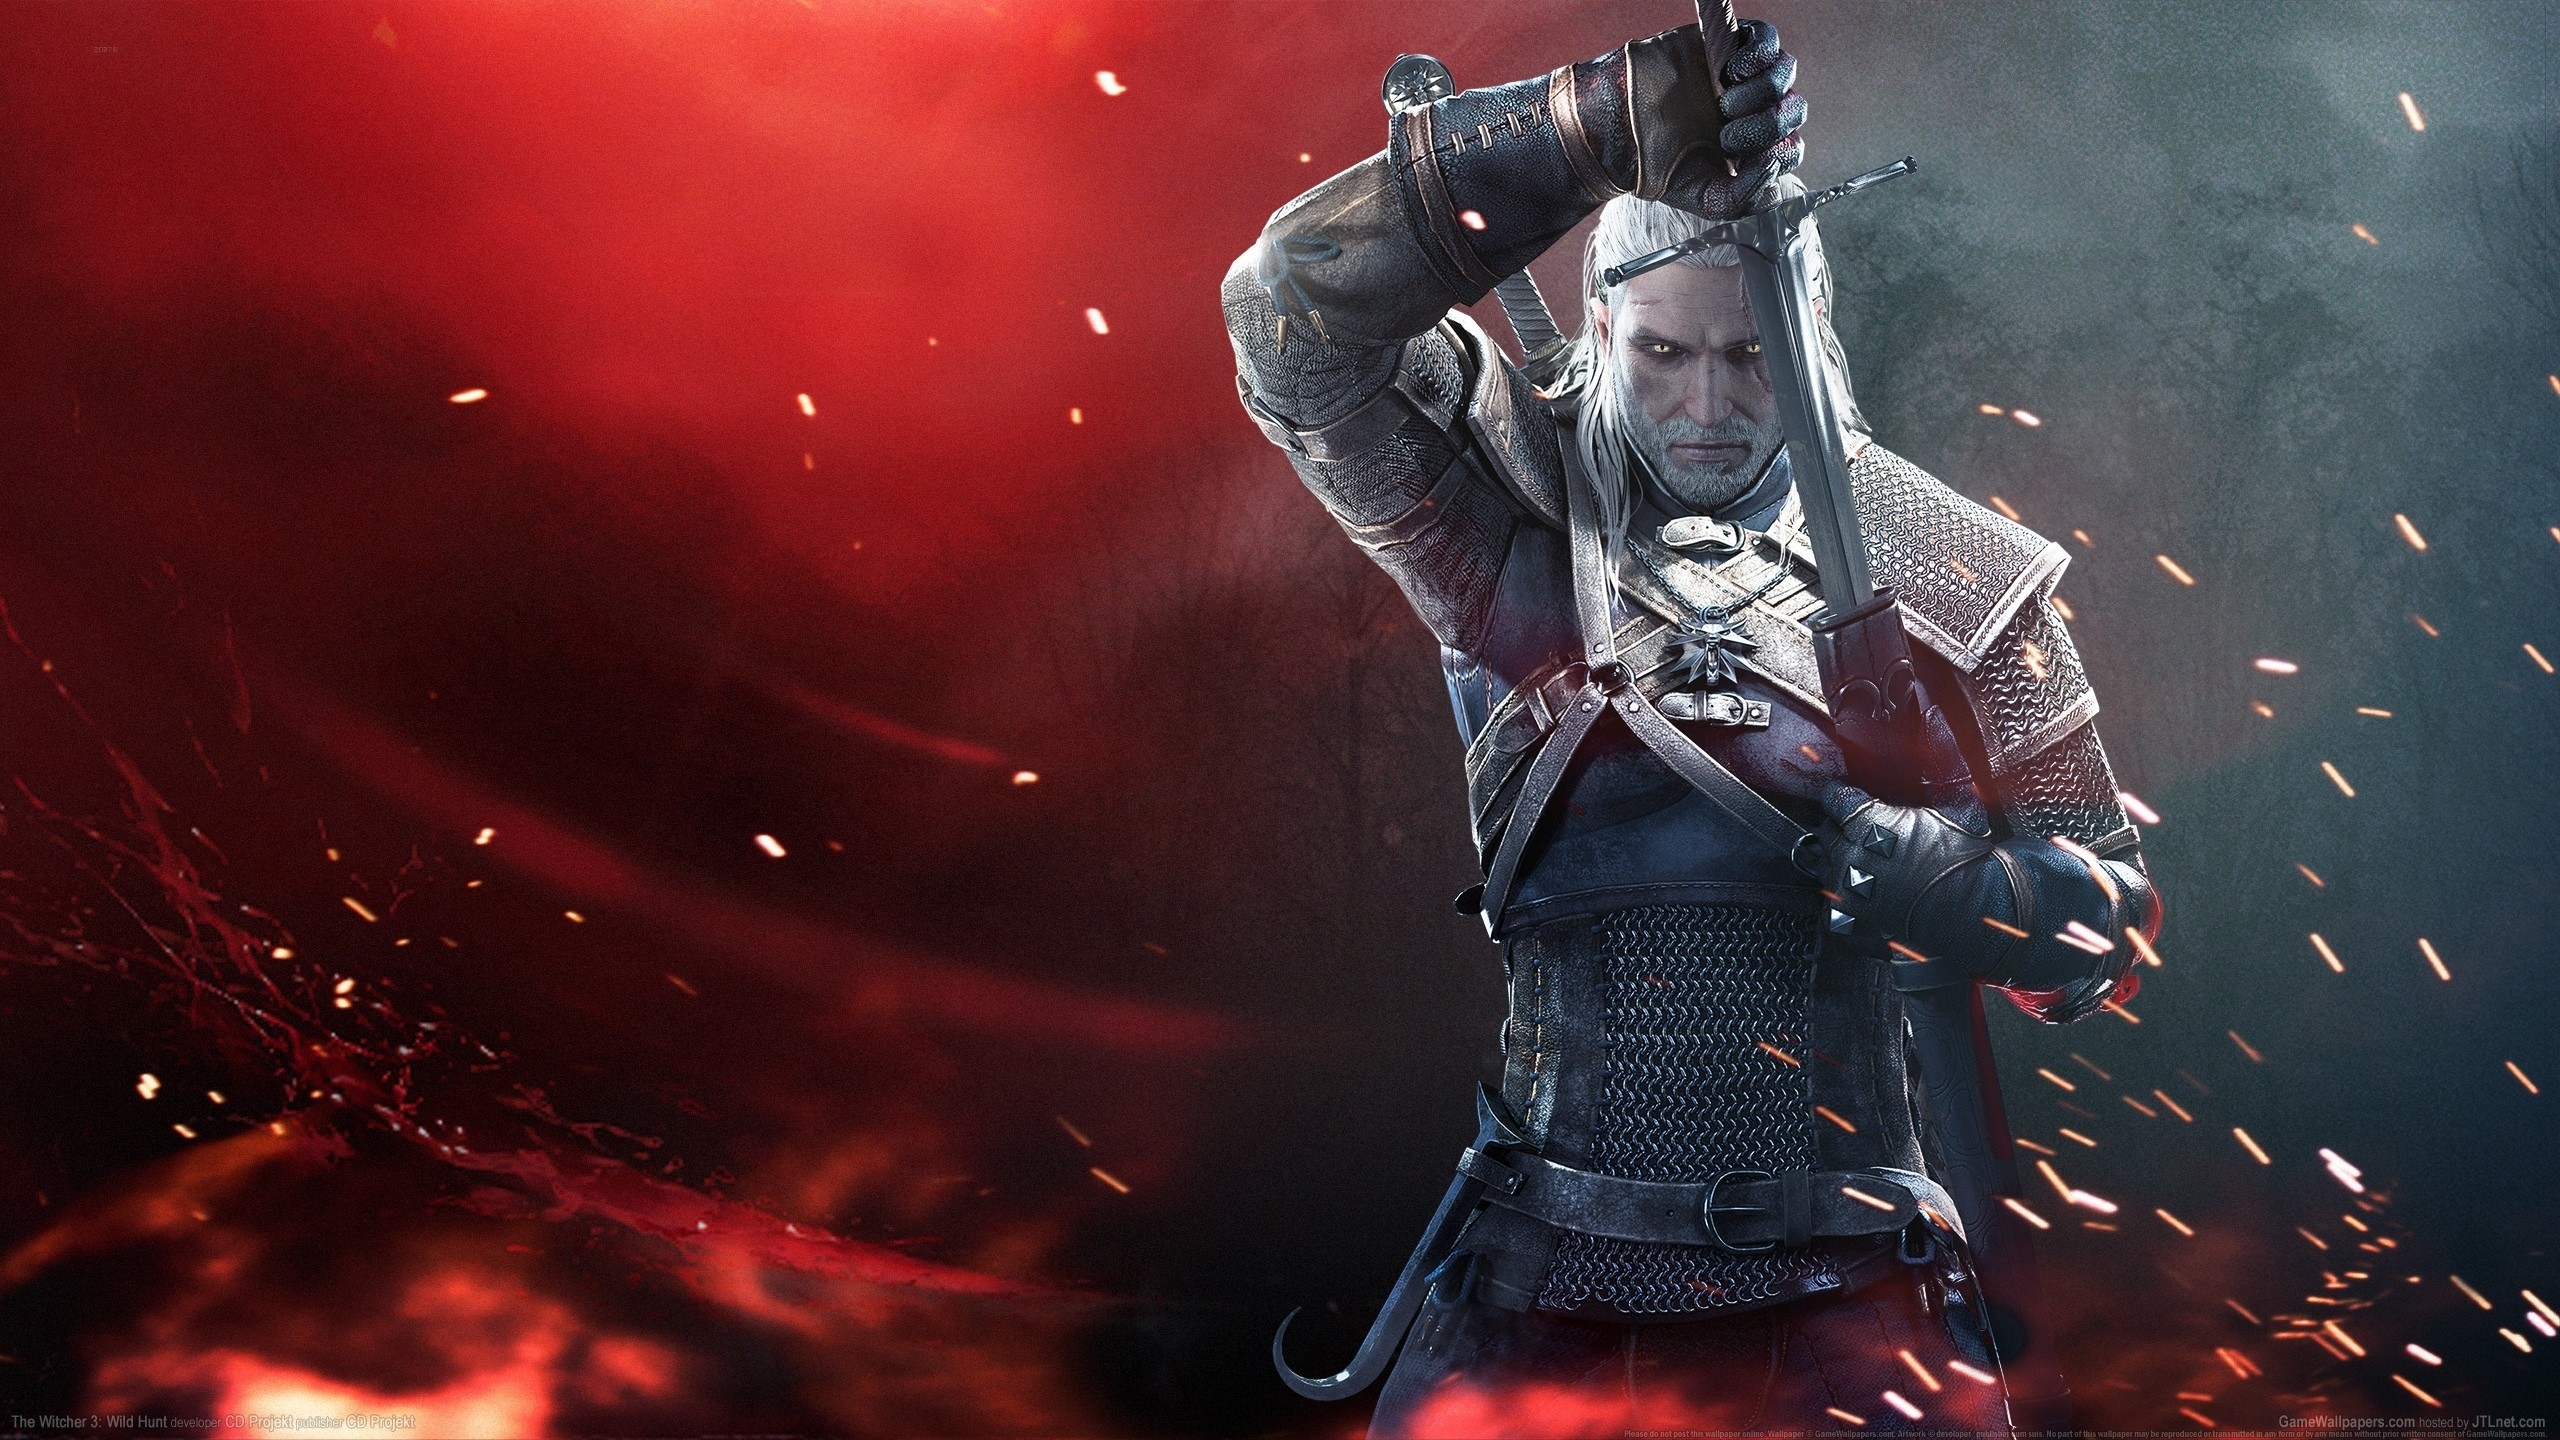 the witcher 3 wild hunt game download for android